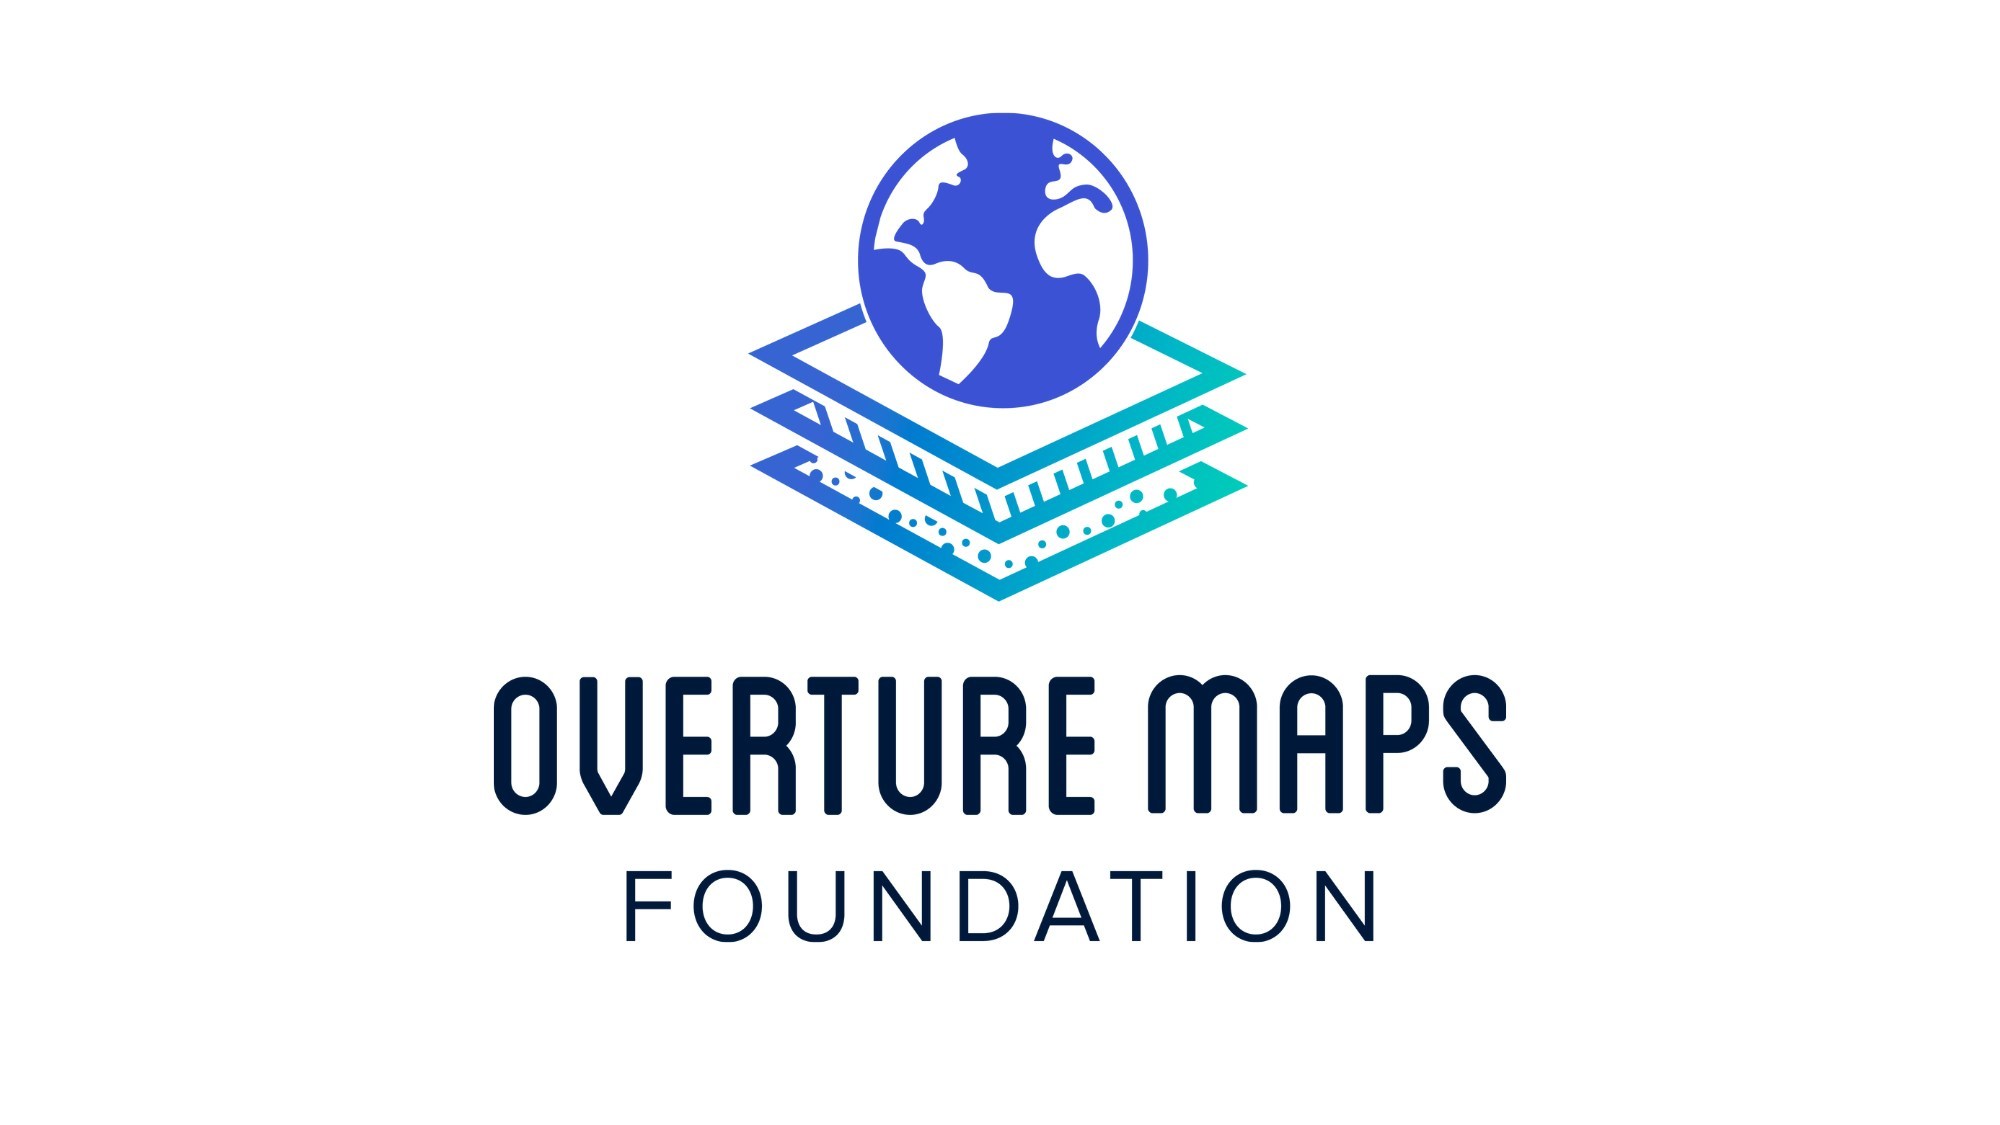 Linux Foundation teams up with AWS, Meta, Microsoft others to build interoperable maps data – The Tech Portal